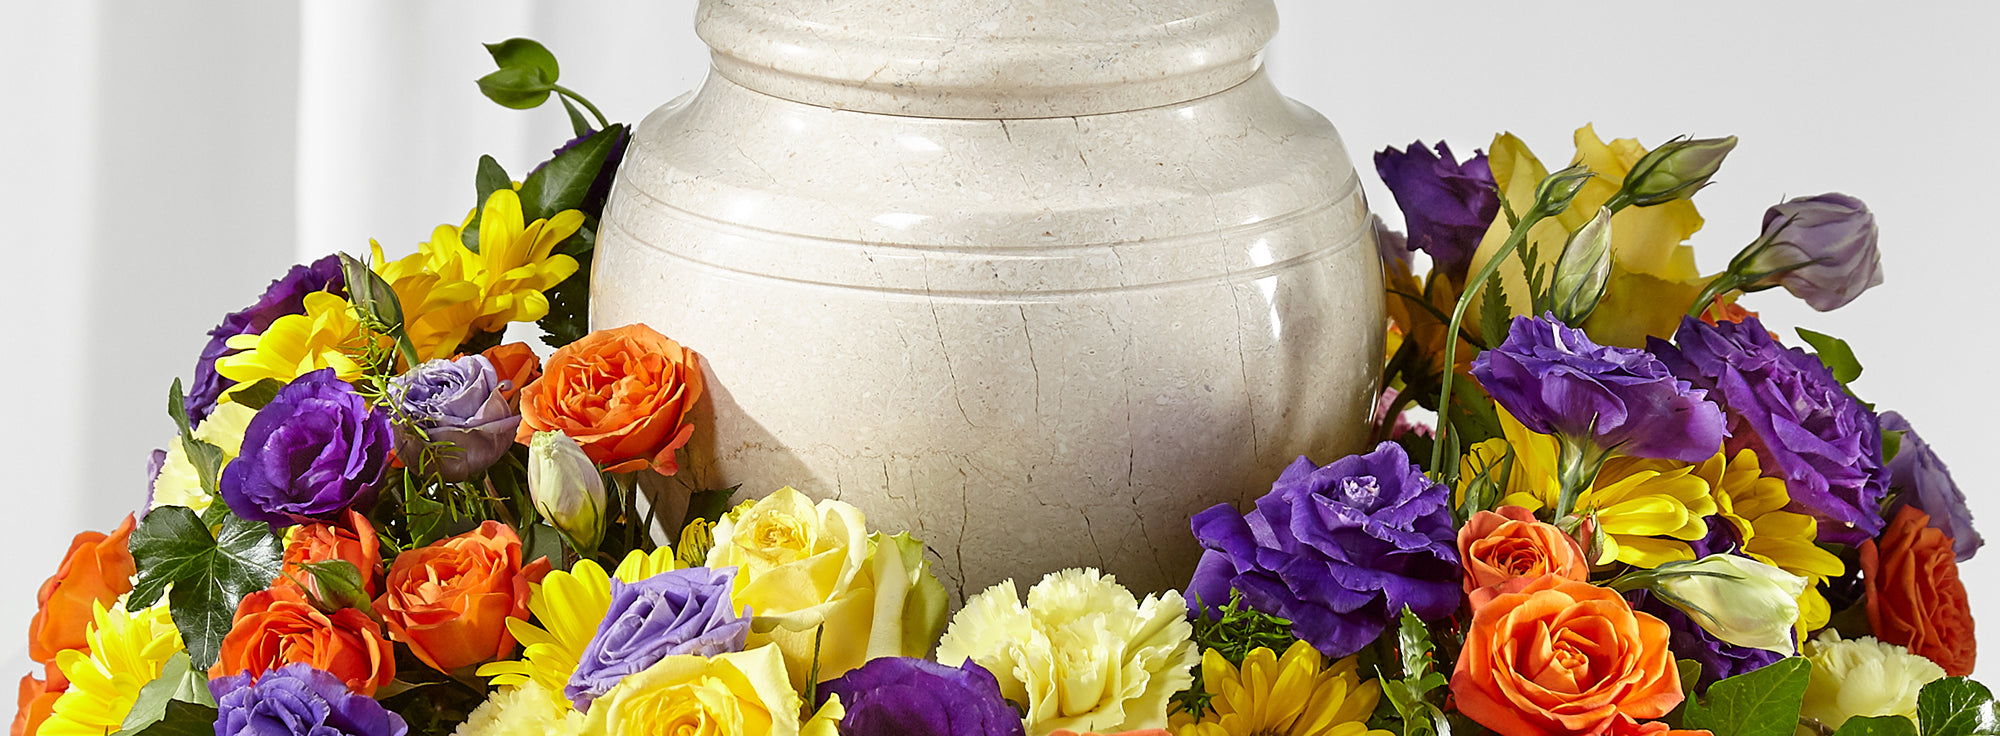 Beautiful Flowers for Funeral Urns